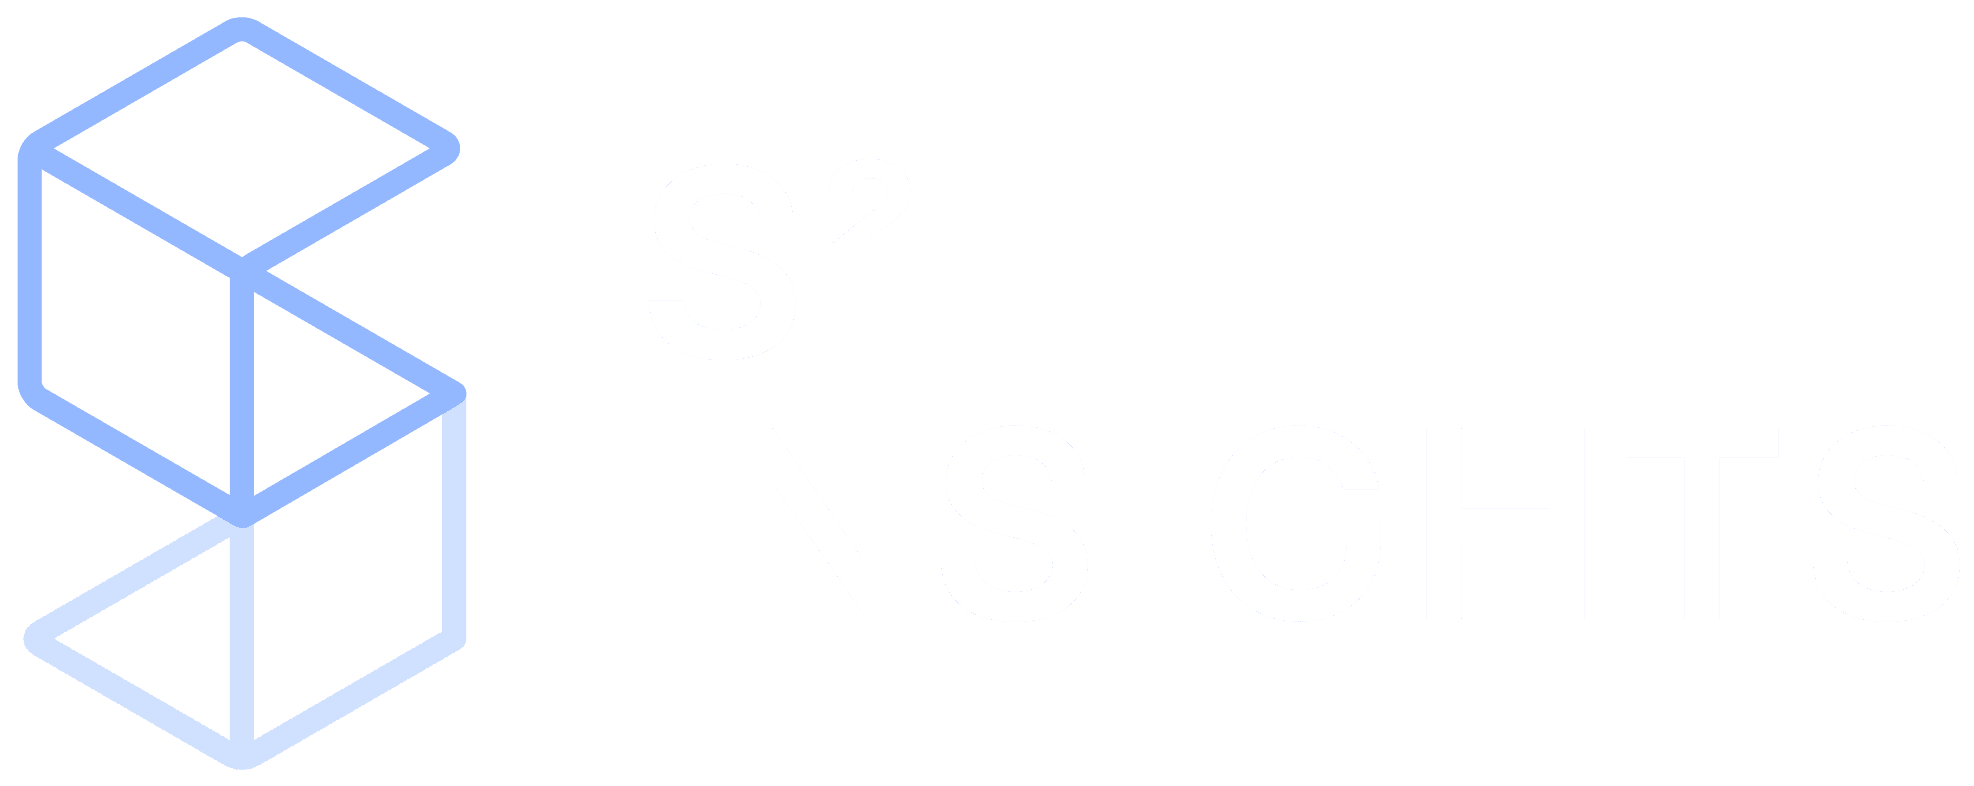 S Squared Insights logo